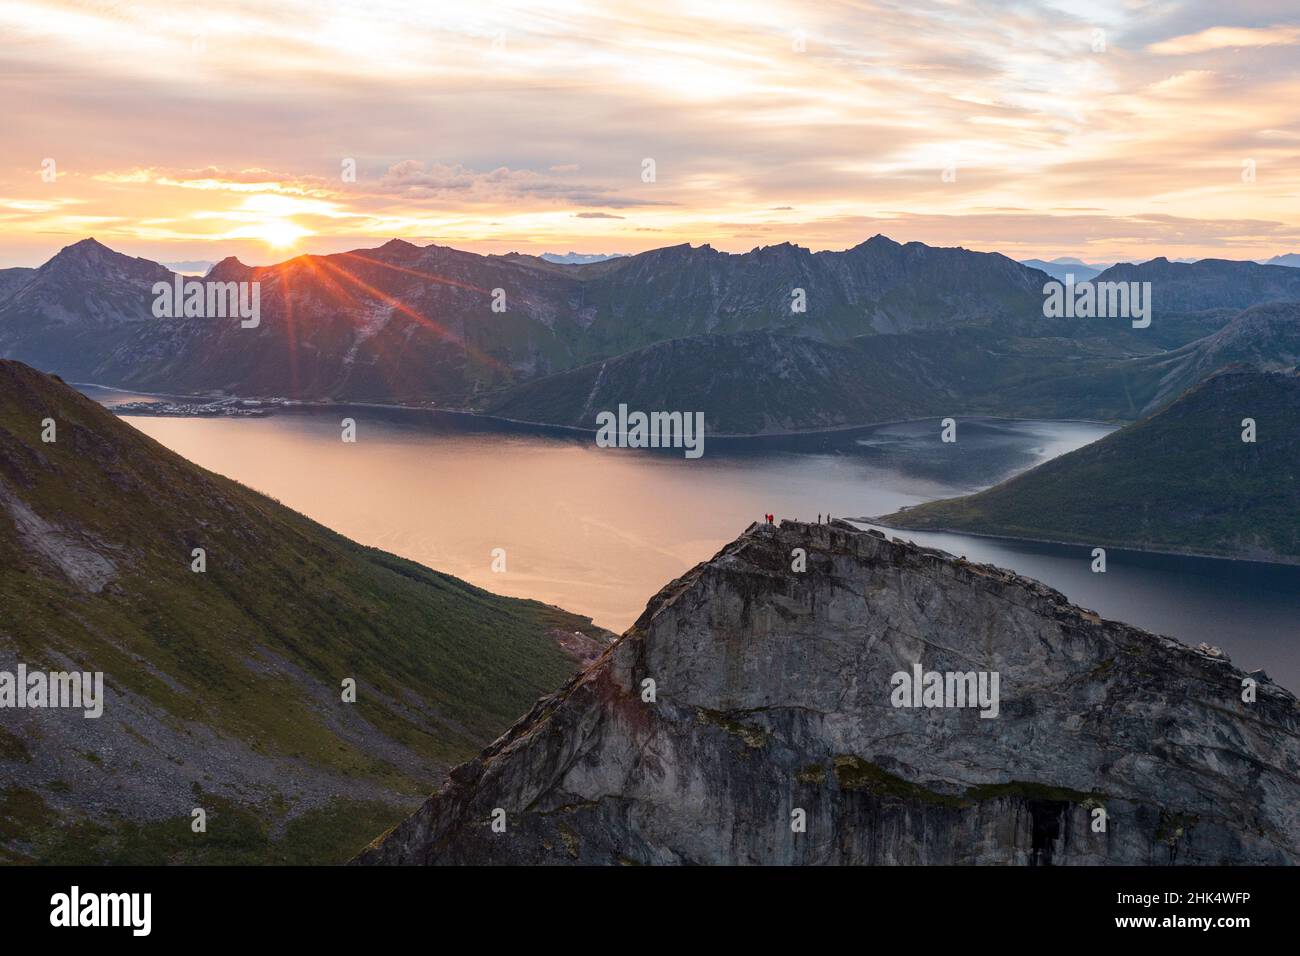 People admiring the sky at dawn standing on mountain top above the fjords, Senja island, Troms county, Norway, Scandinavia, Europe Stock Photo